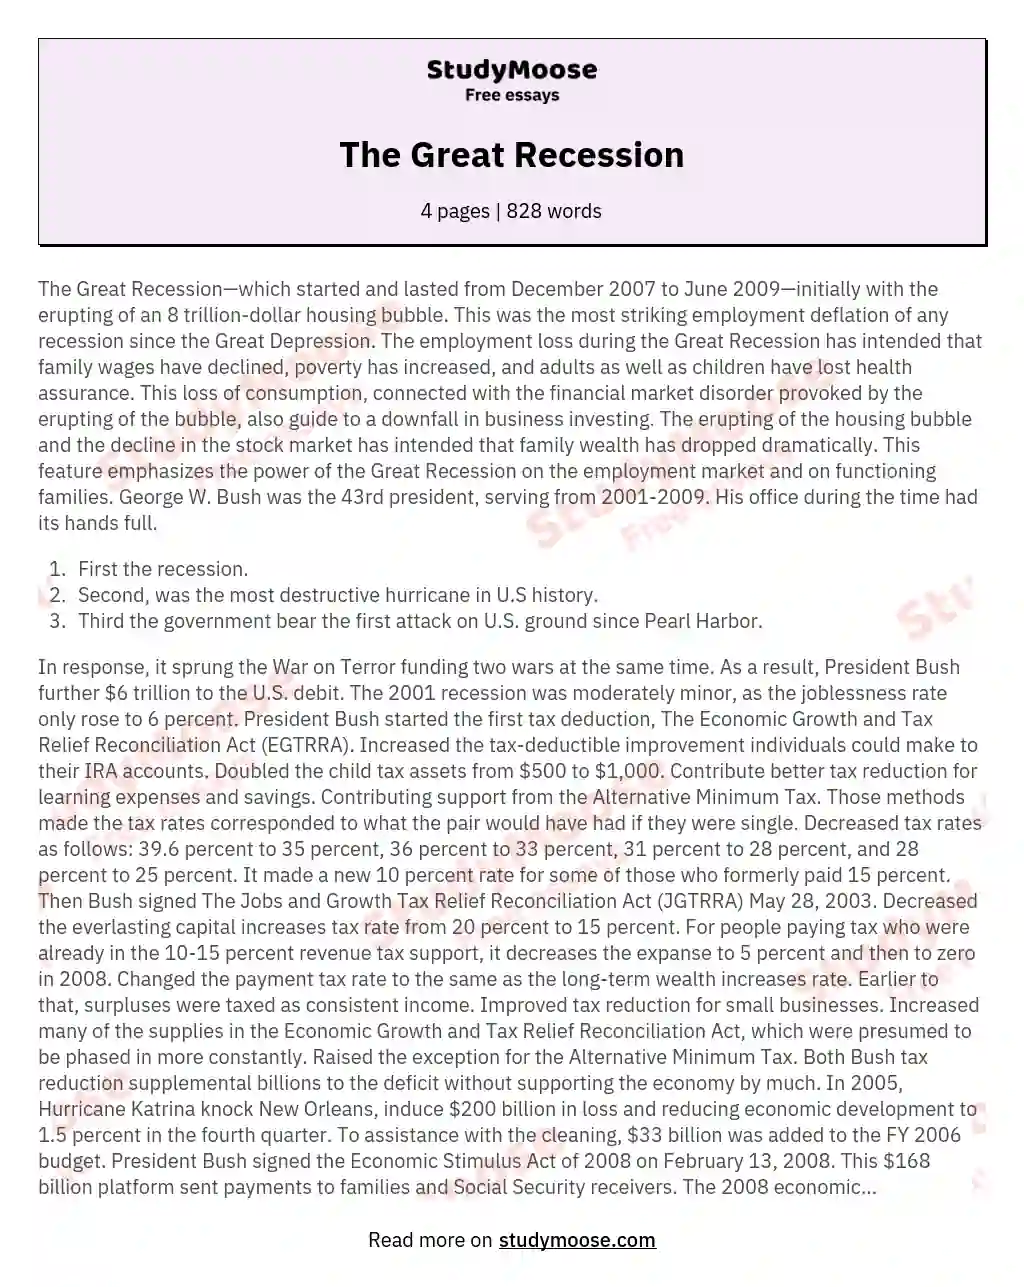 The Great Recession essay